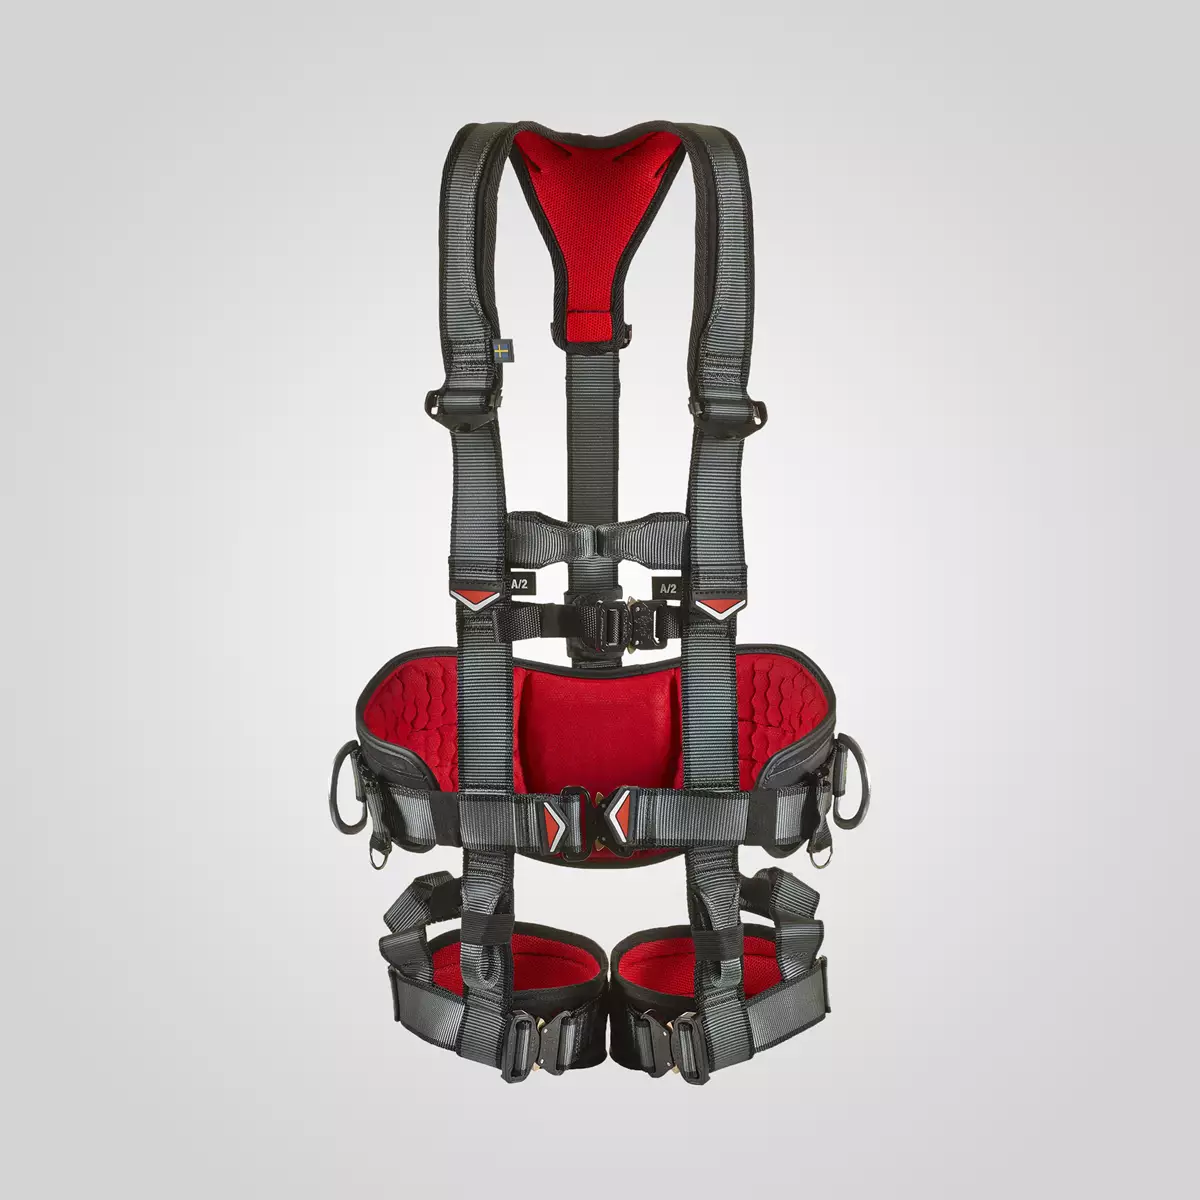 Harness with belt for positioning